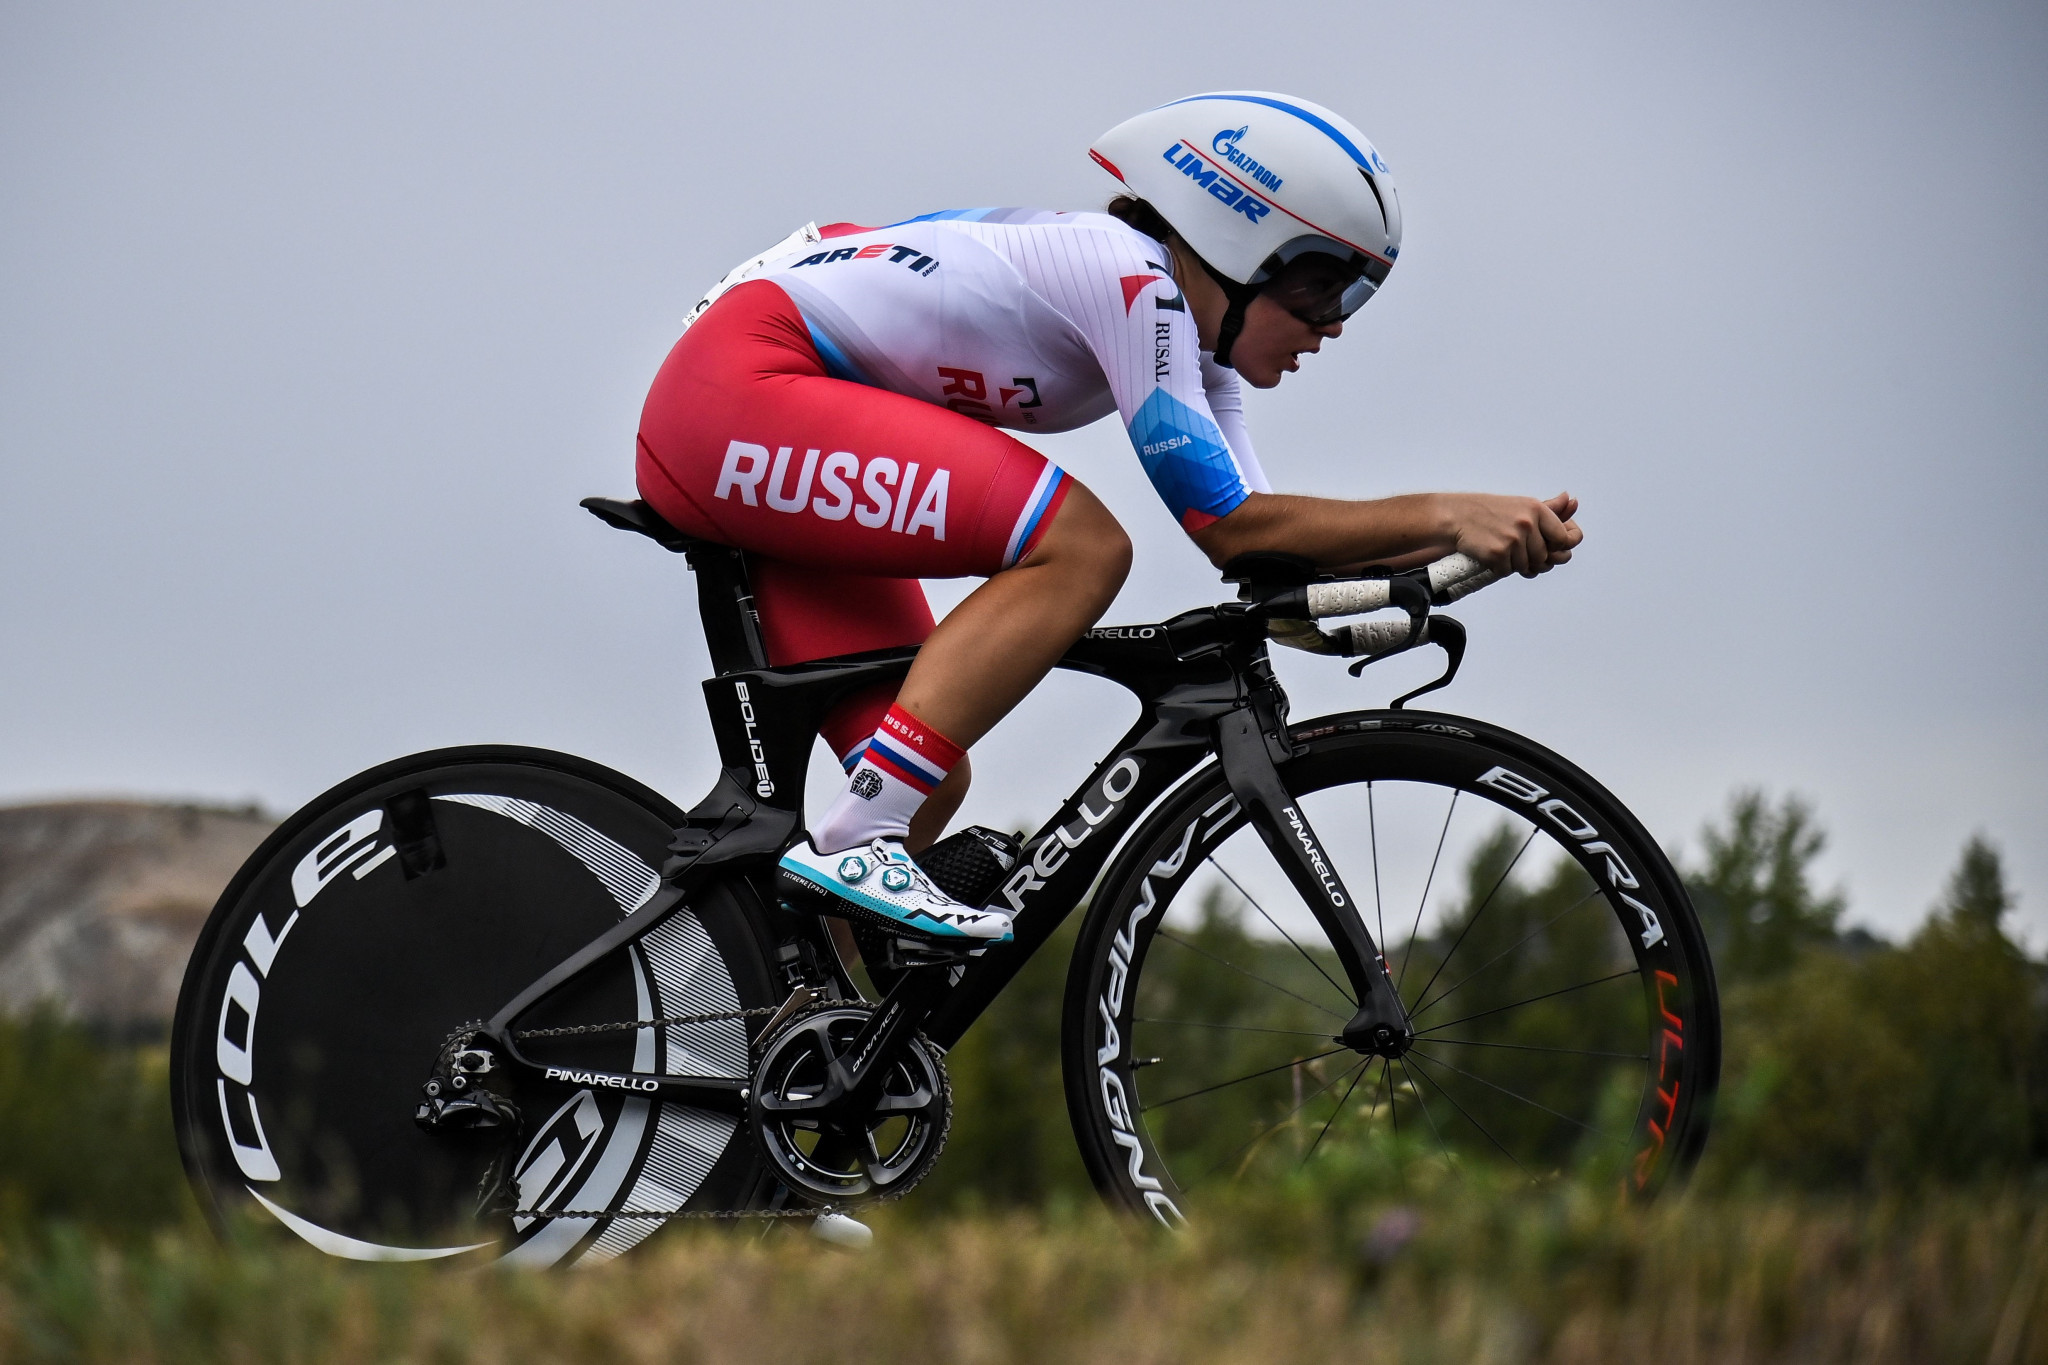 UCI bans Russian and Belarusian teams and sponsors, but no blanket ban on cyclists